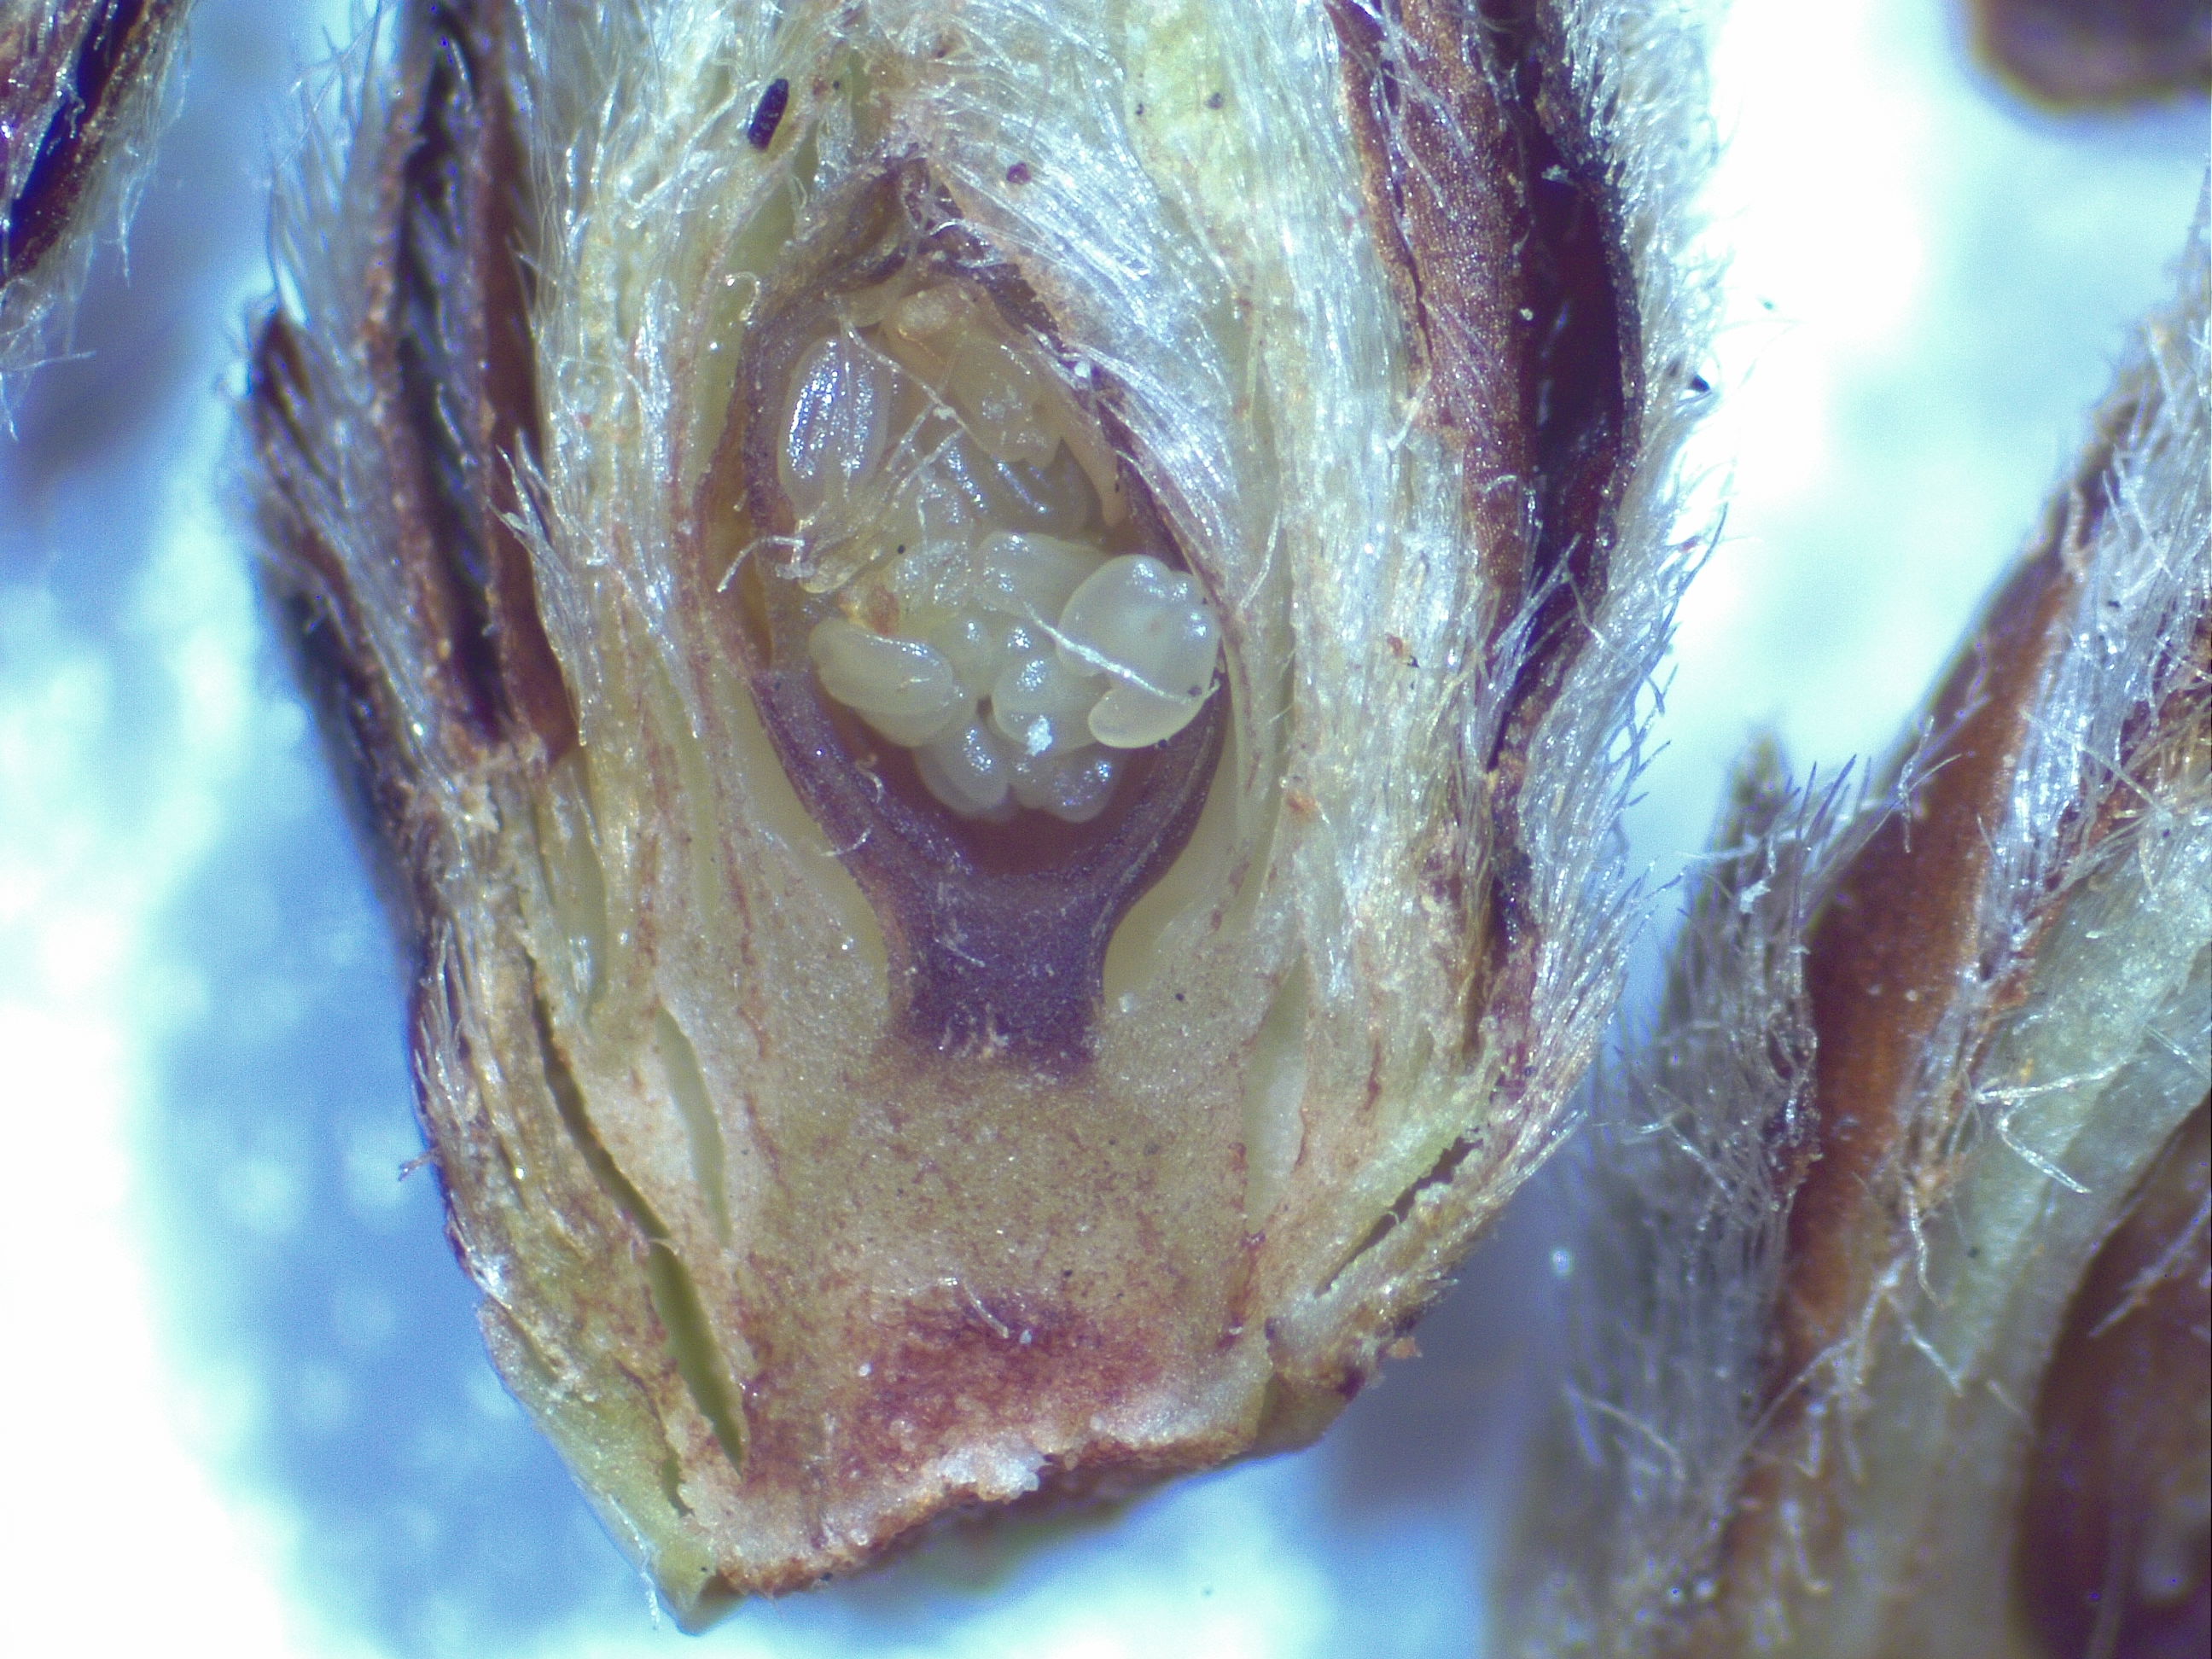 Contender peach bud in cross section